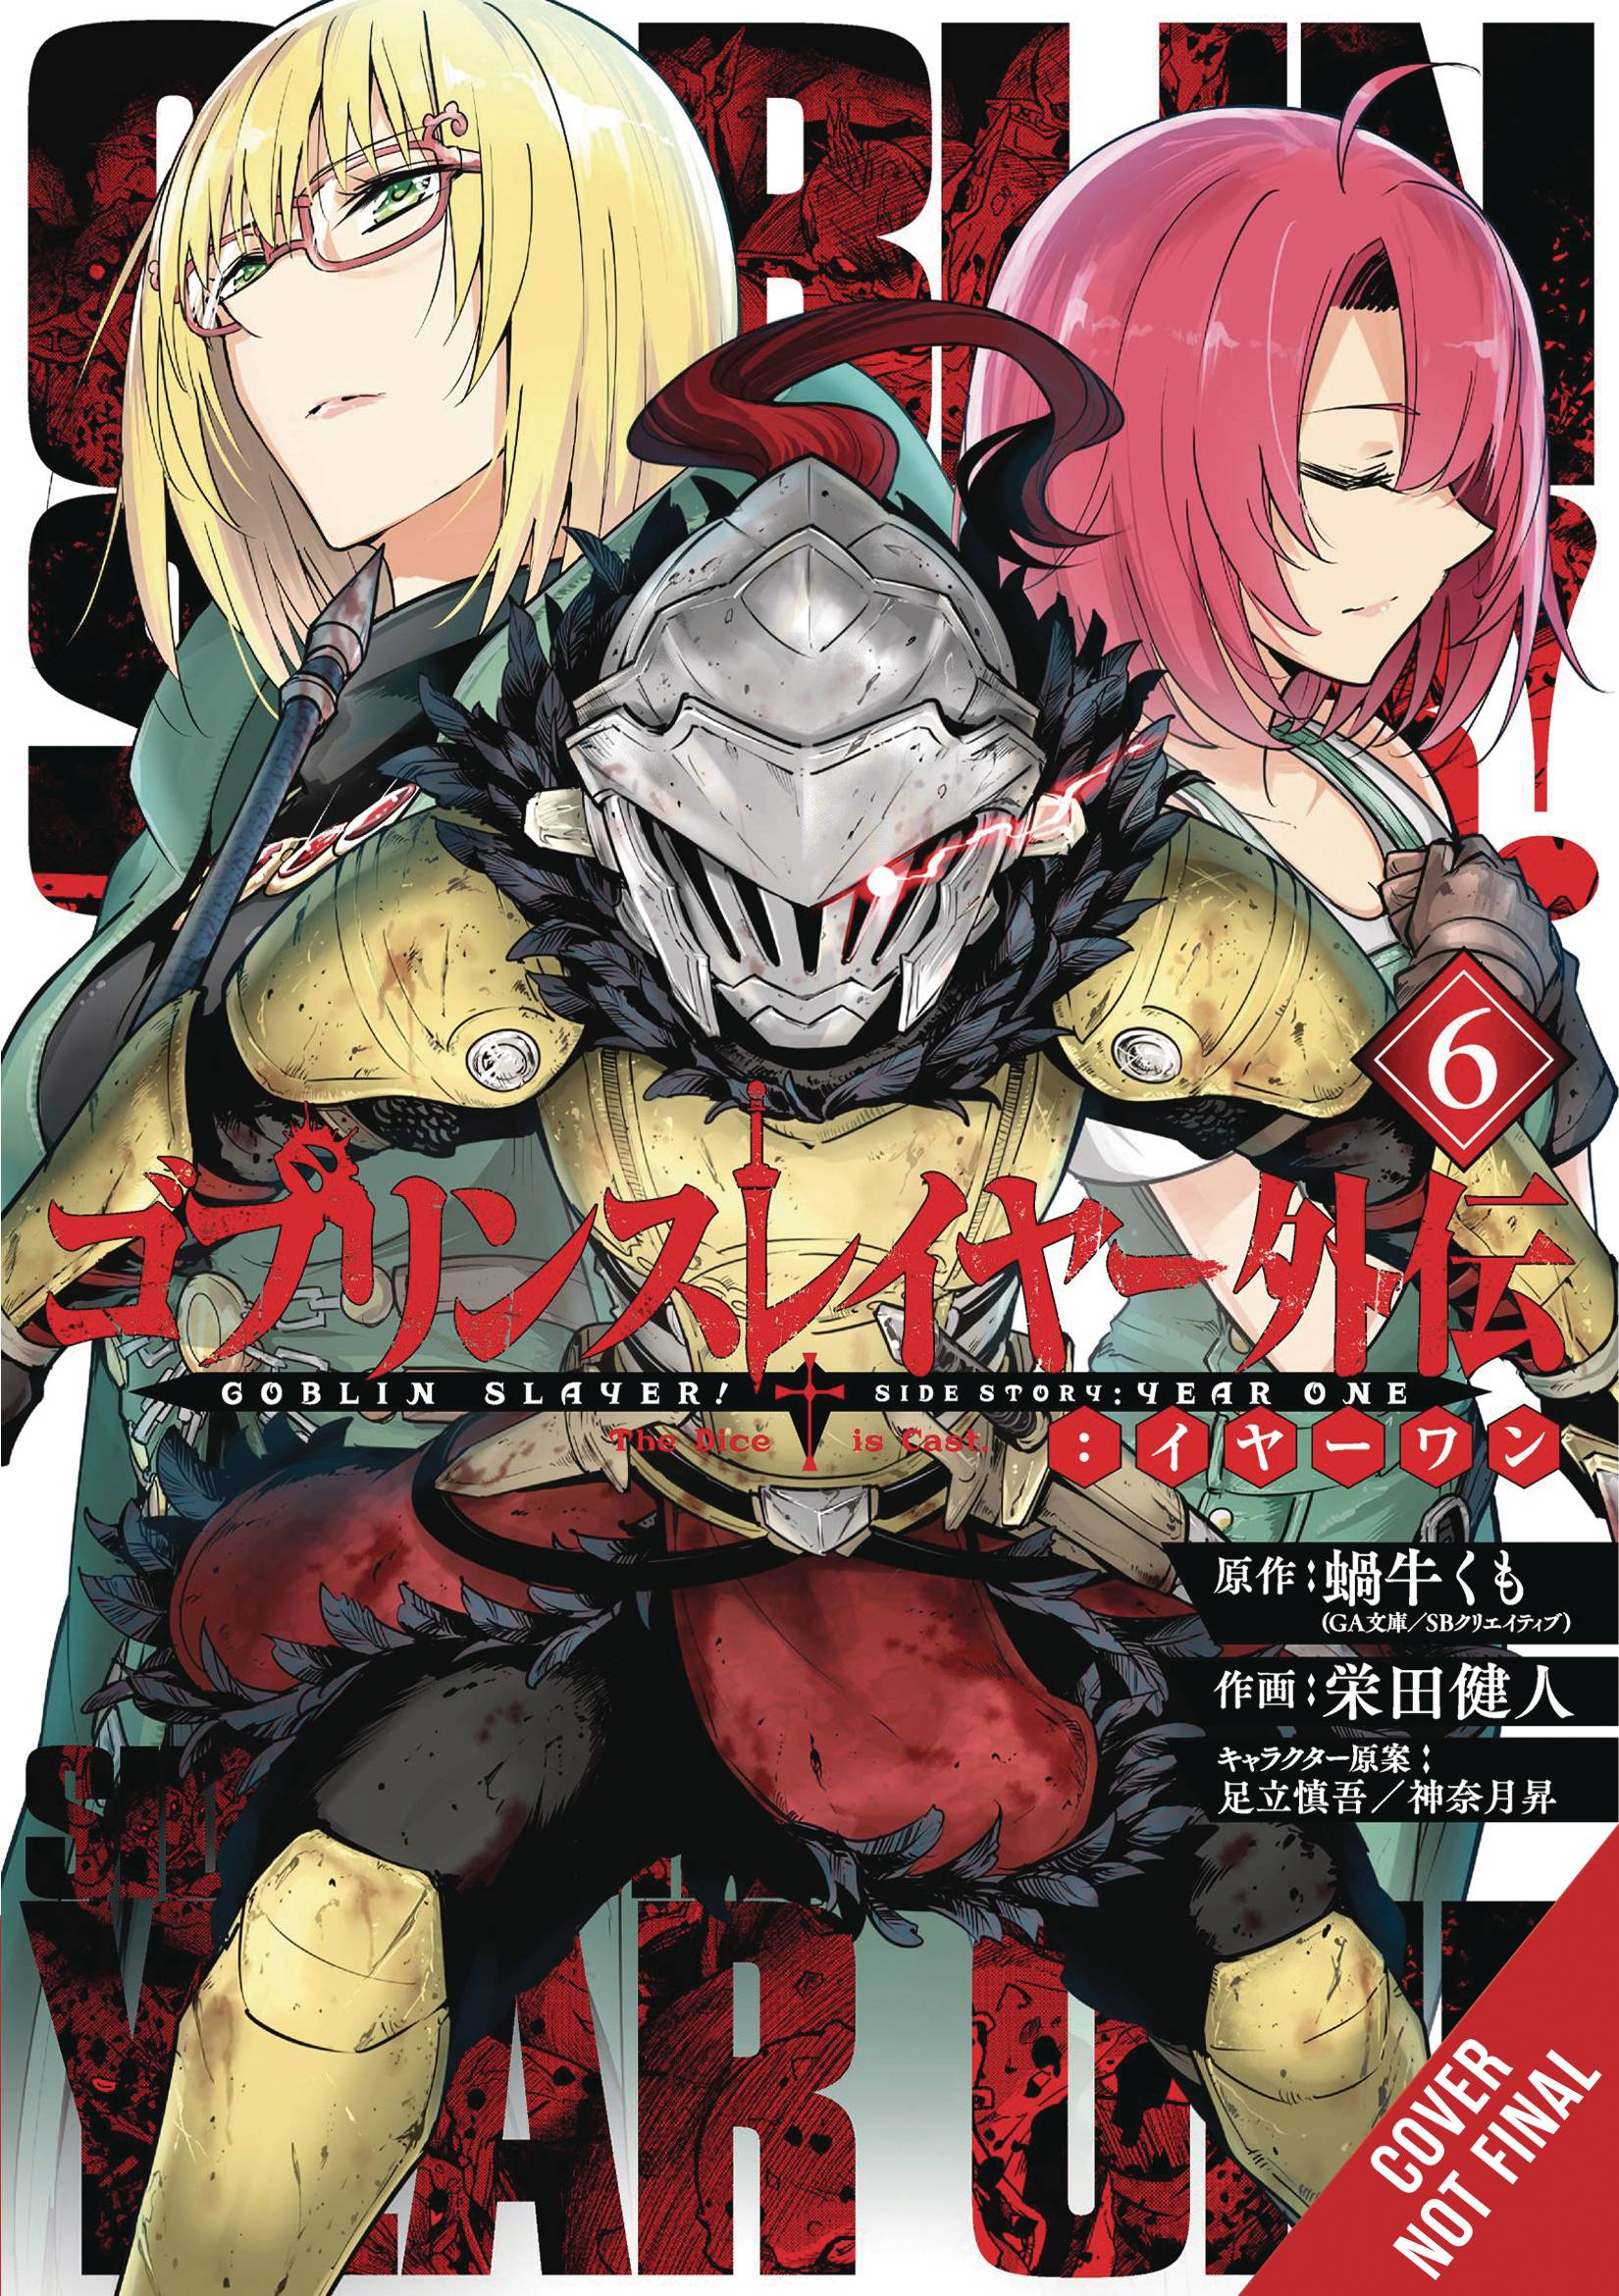 Dec Goblin Slayer Side Story Year One Gn Vol Res Previews World